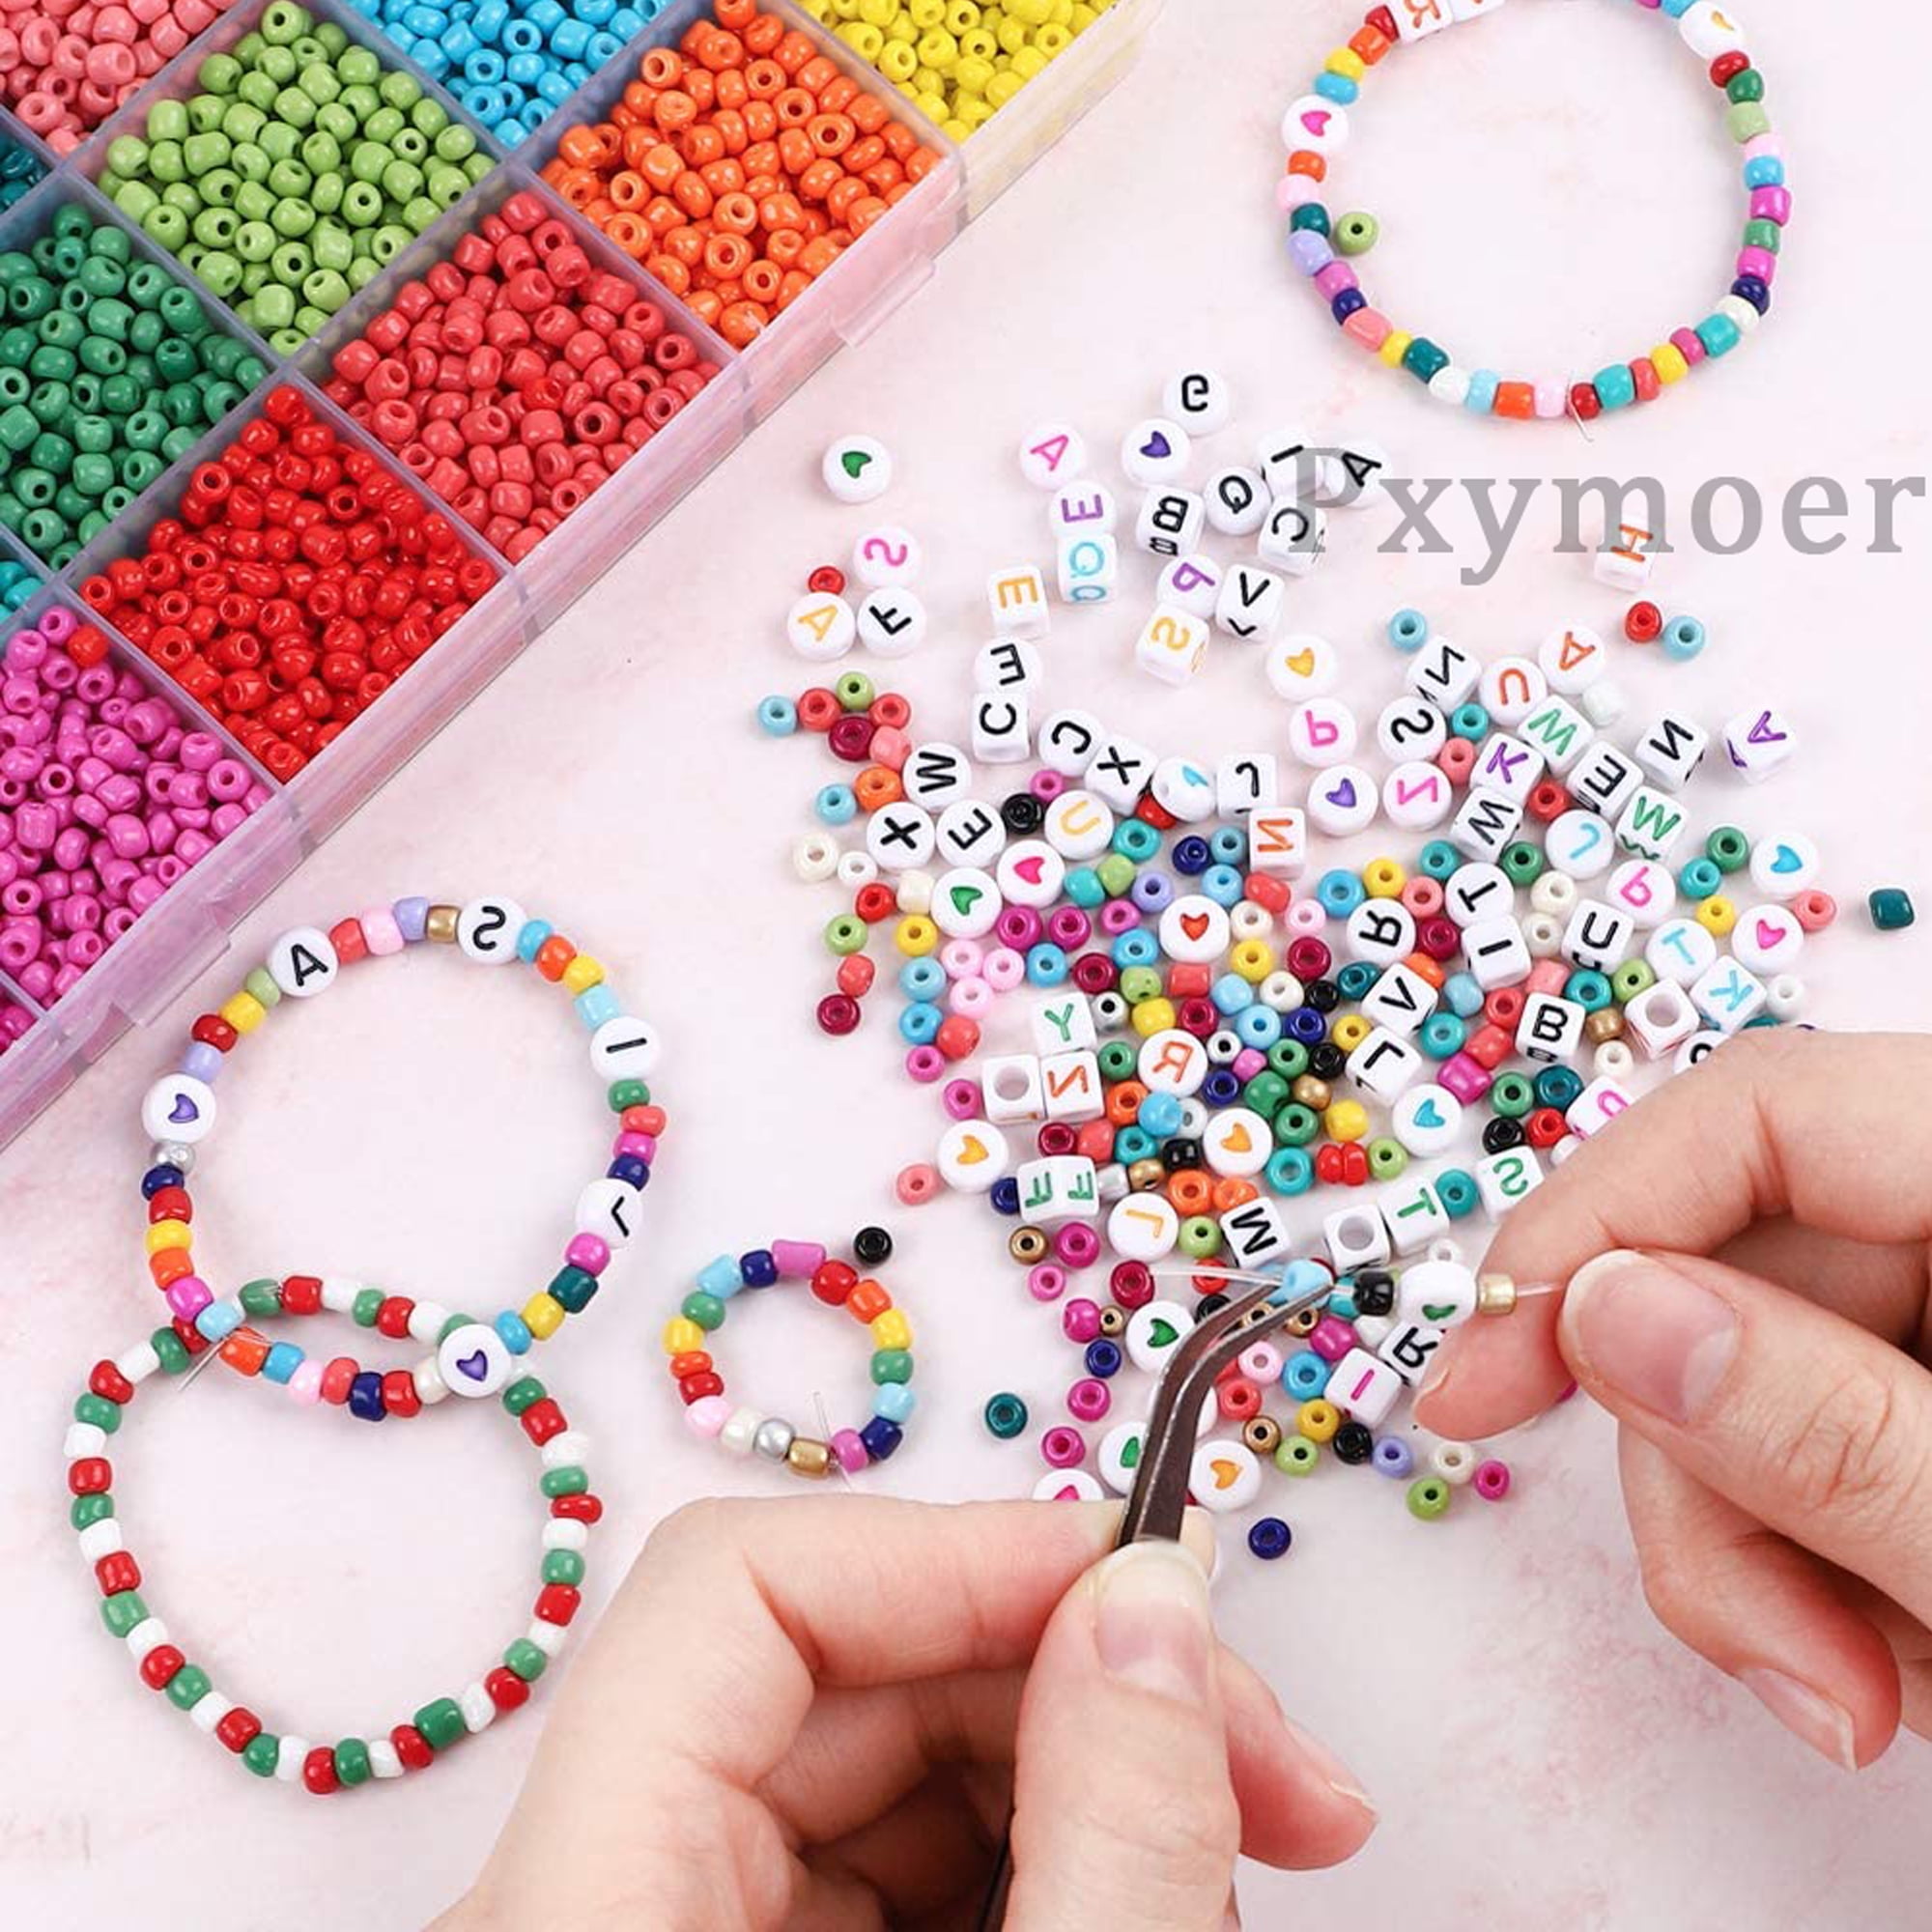  10000Pcs 12/0 2mm Glass Seed Beads for Jewelry Making, Bulk  Pony Opaque Bead Colorful Neon Beads Set for DIY Bracelet Earring Necklace  Craft with Crystal Elastic String